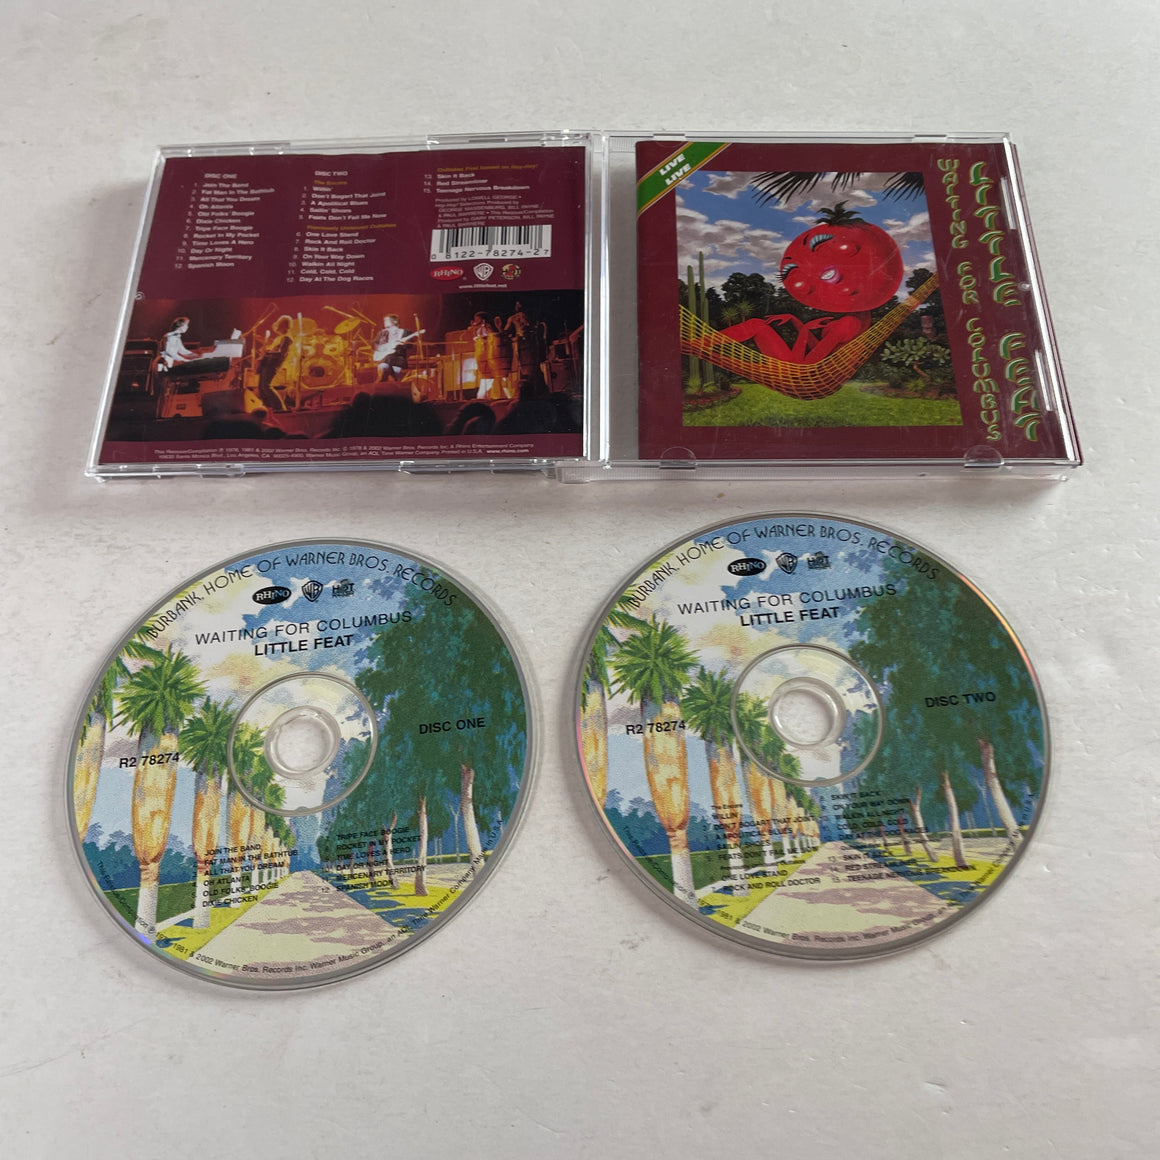 Little Feat Waiting For Columbus Used CD VG+\VG+